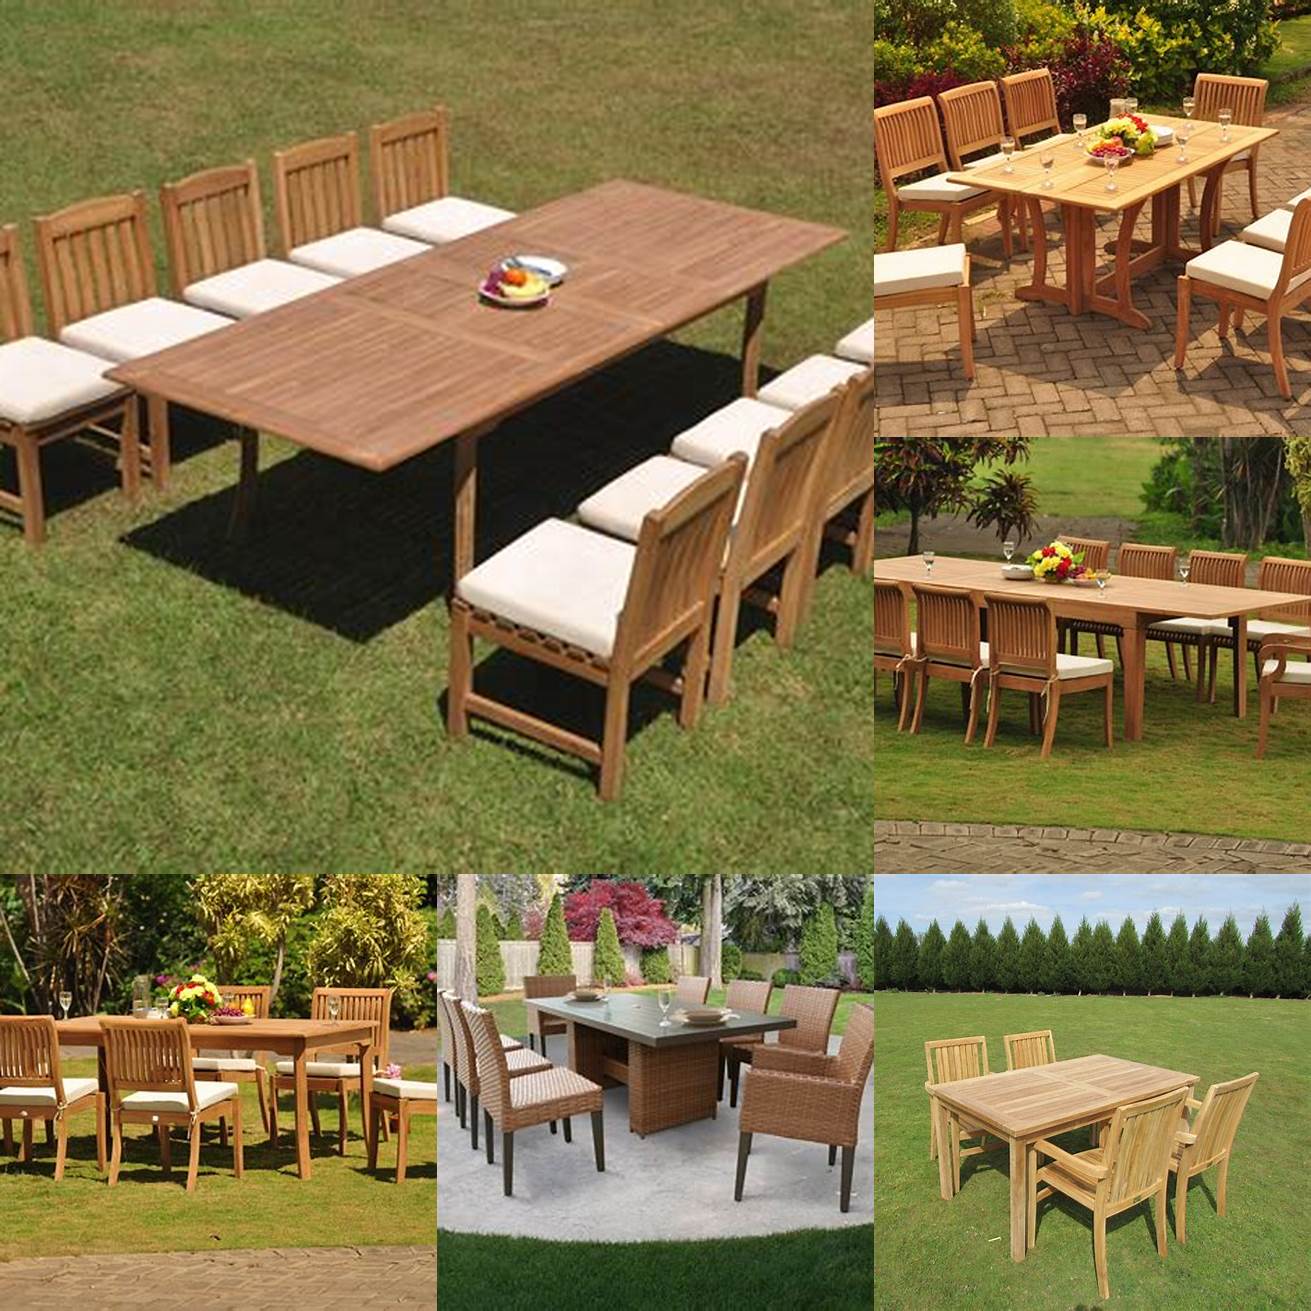 Two armless chairs and a bench around a rectangular teak outdoor table